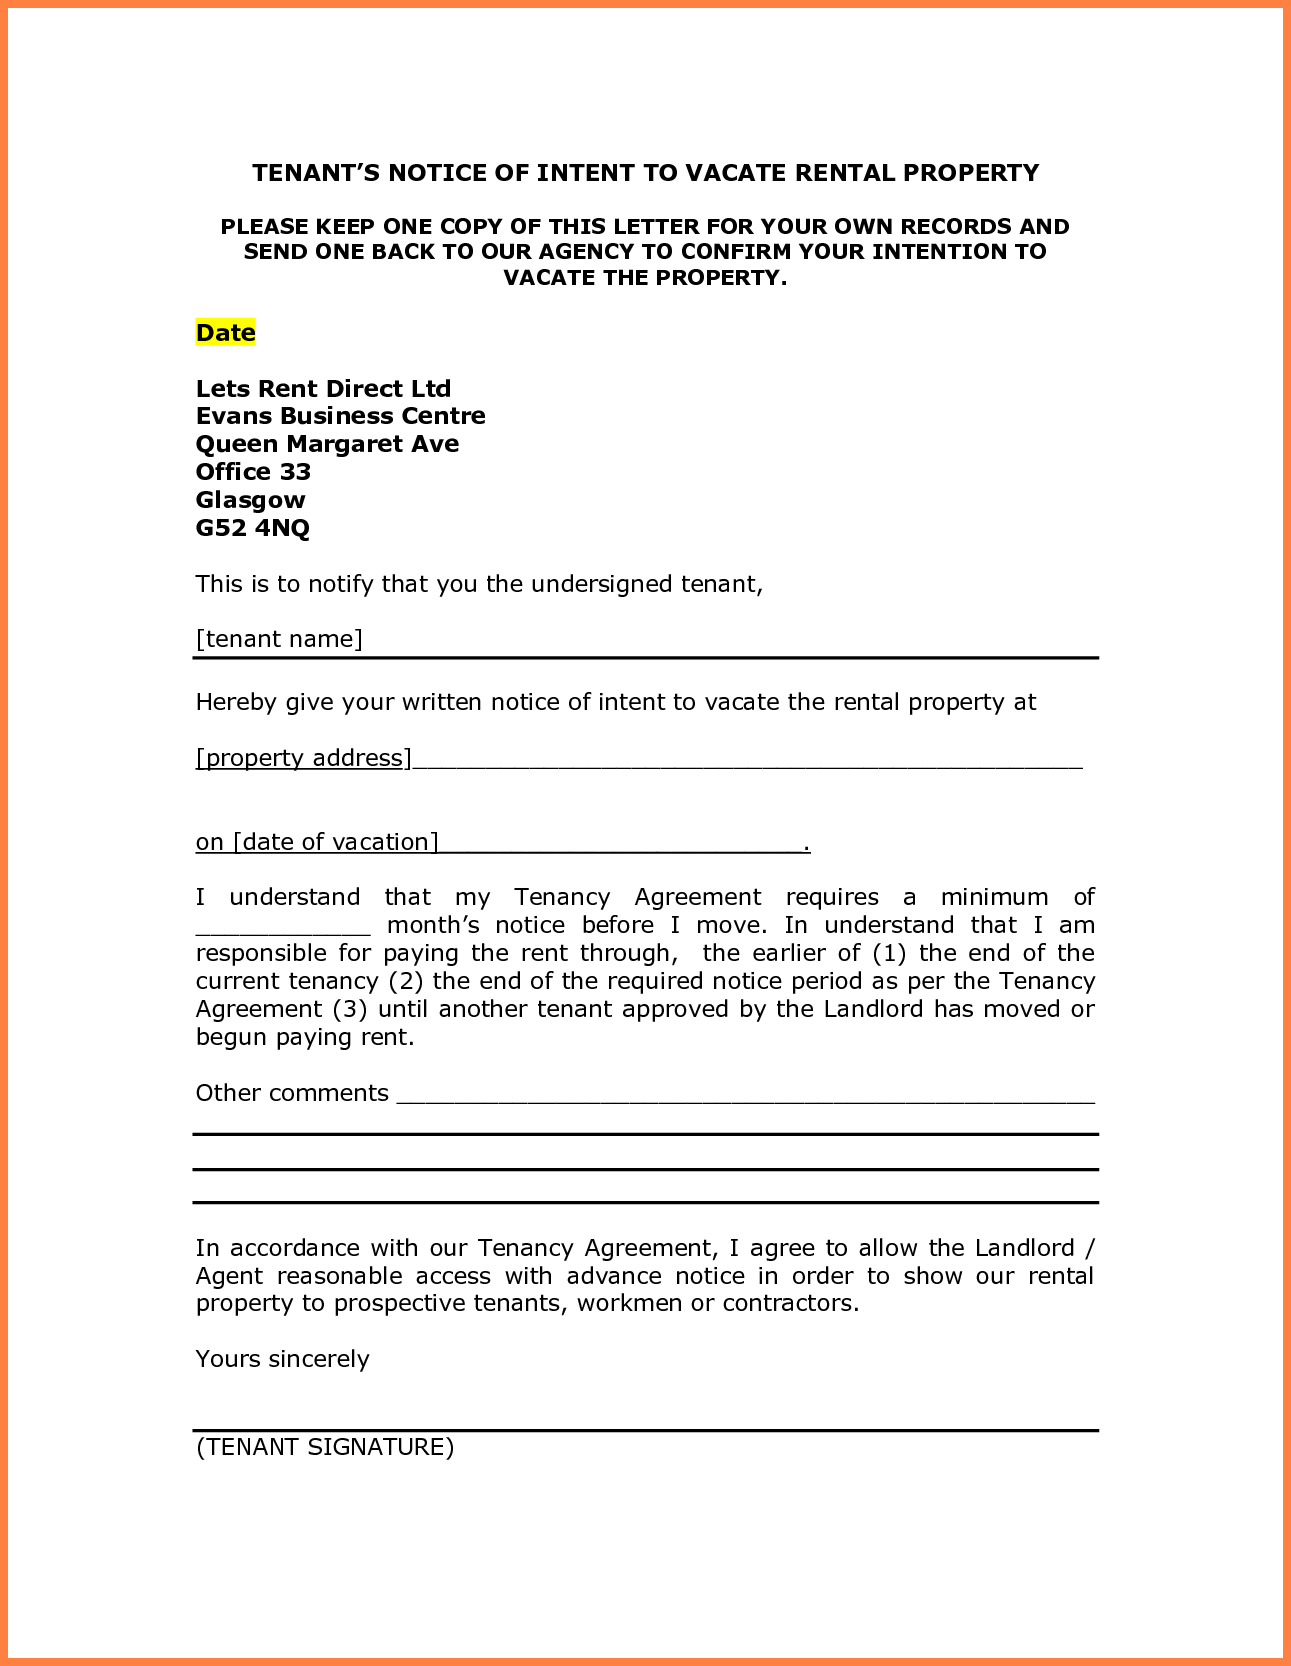 Notice Letter to Tenant From Landlord Template - Letter Intent to Move Sample Notice Vacate Tenant Rentaloperty